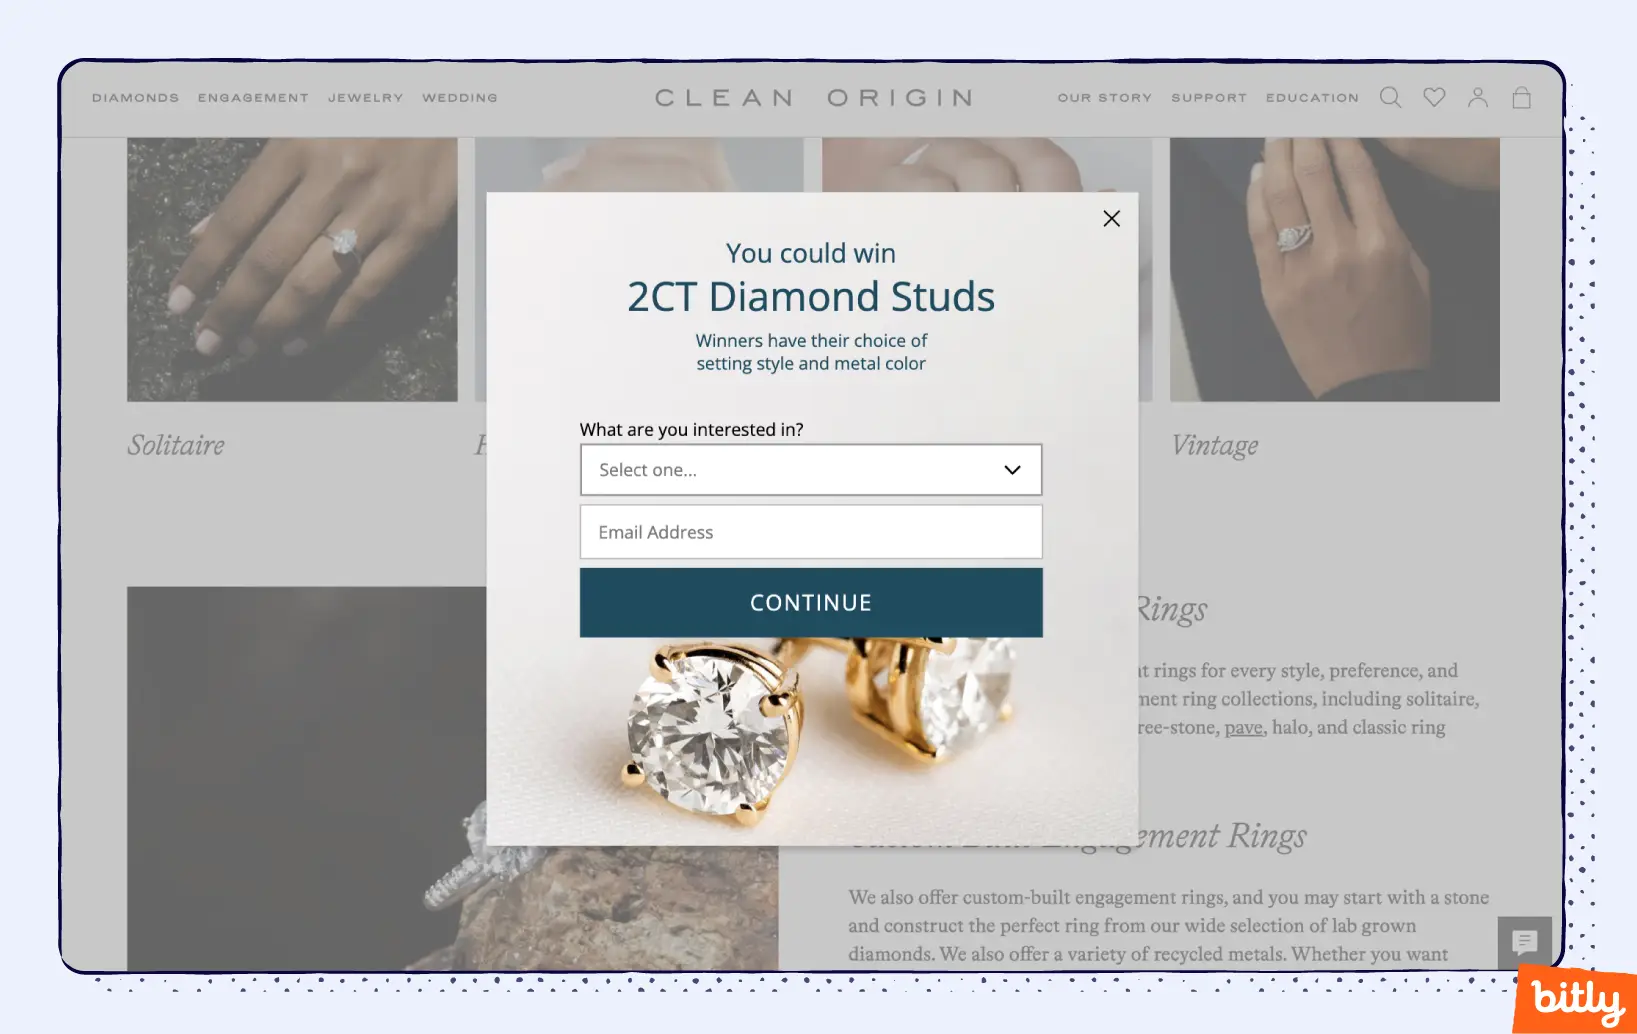 A popup window on the Clean Origin website allowing a user to enter their email address for a chance to win diamond earrings.